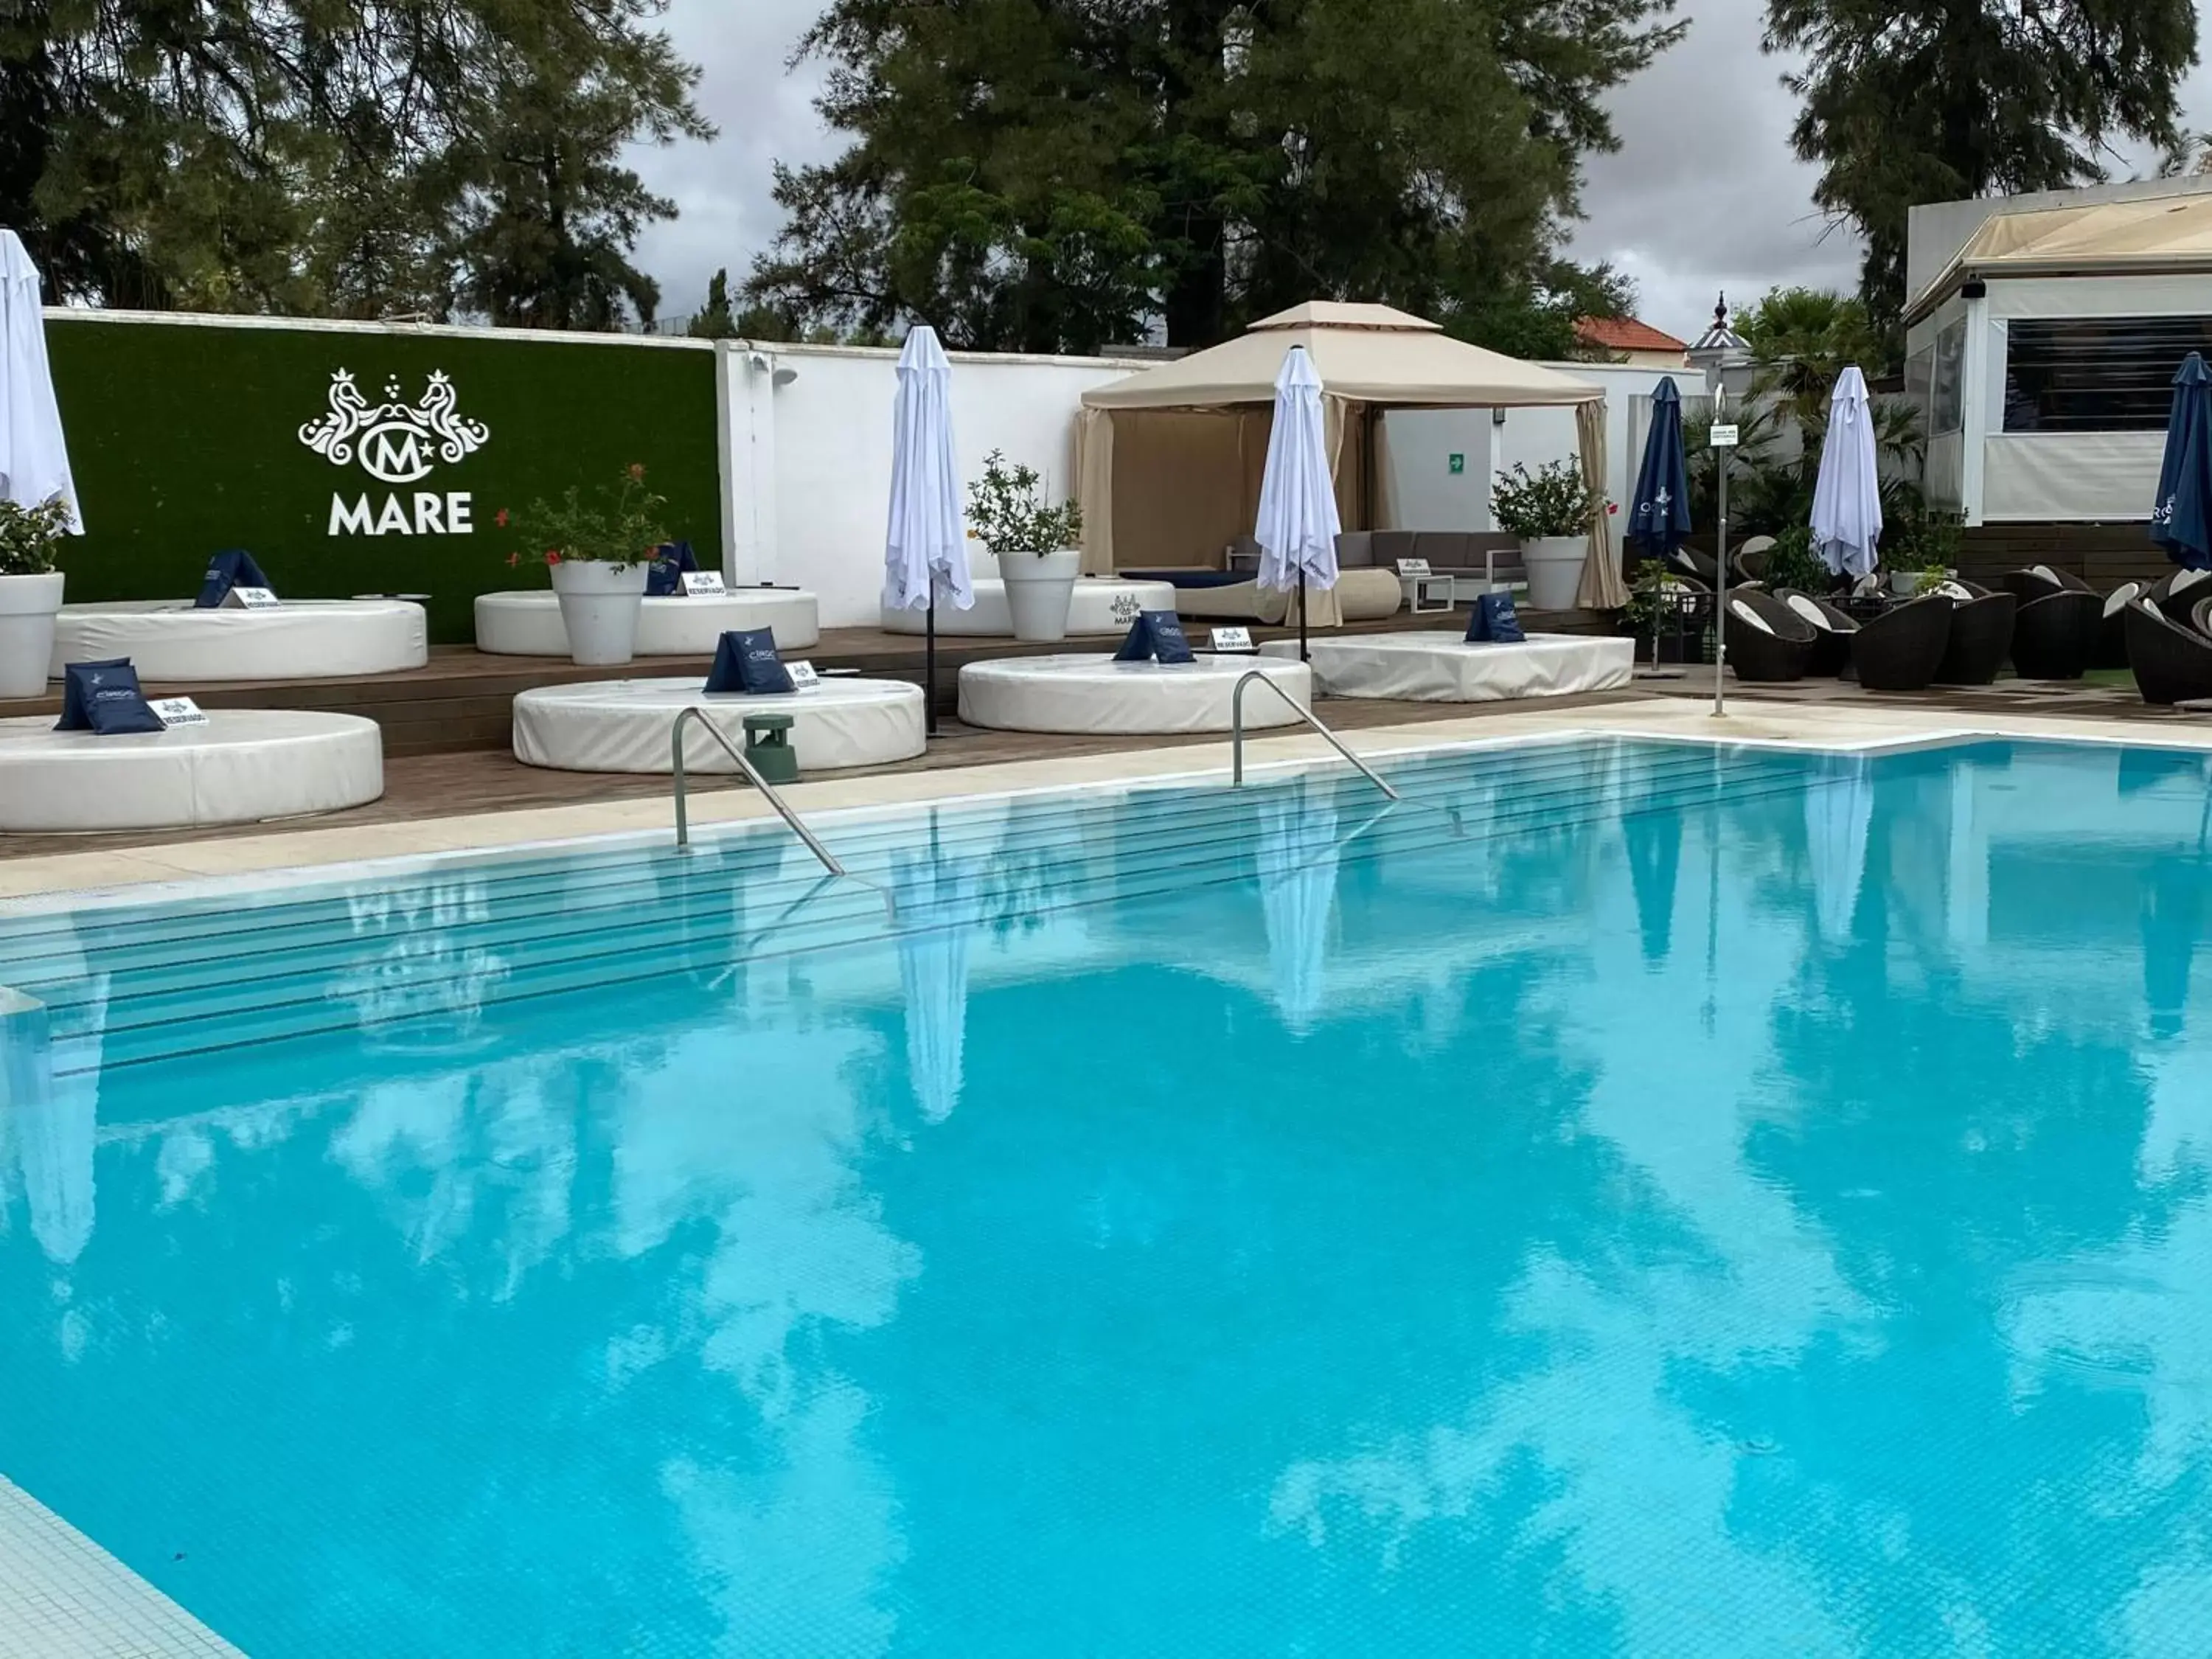 Swimming Pool in Mare Hotel